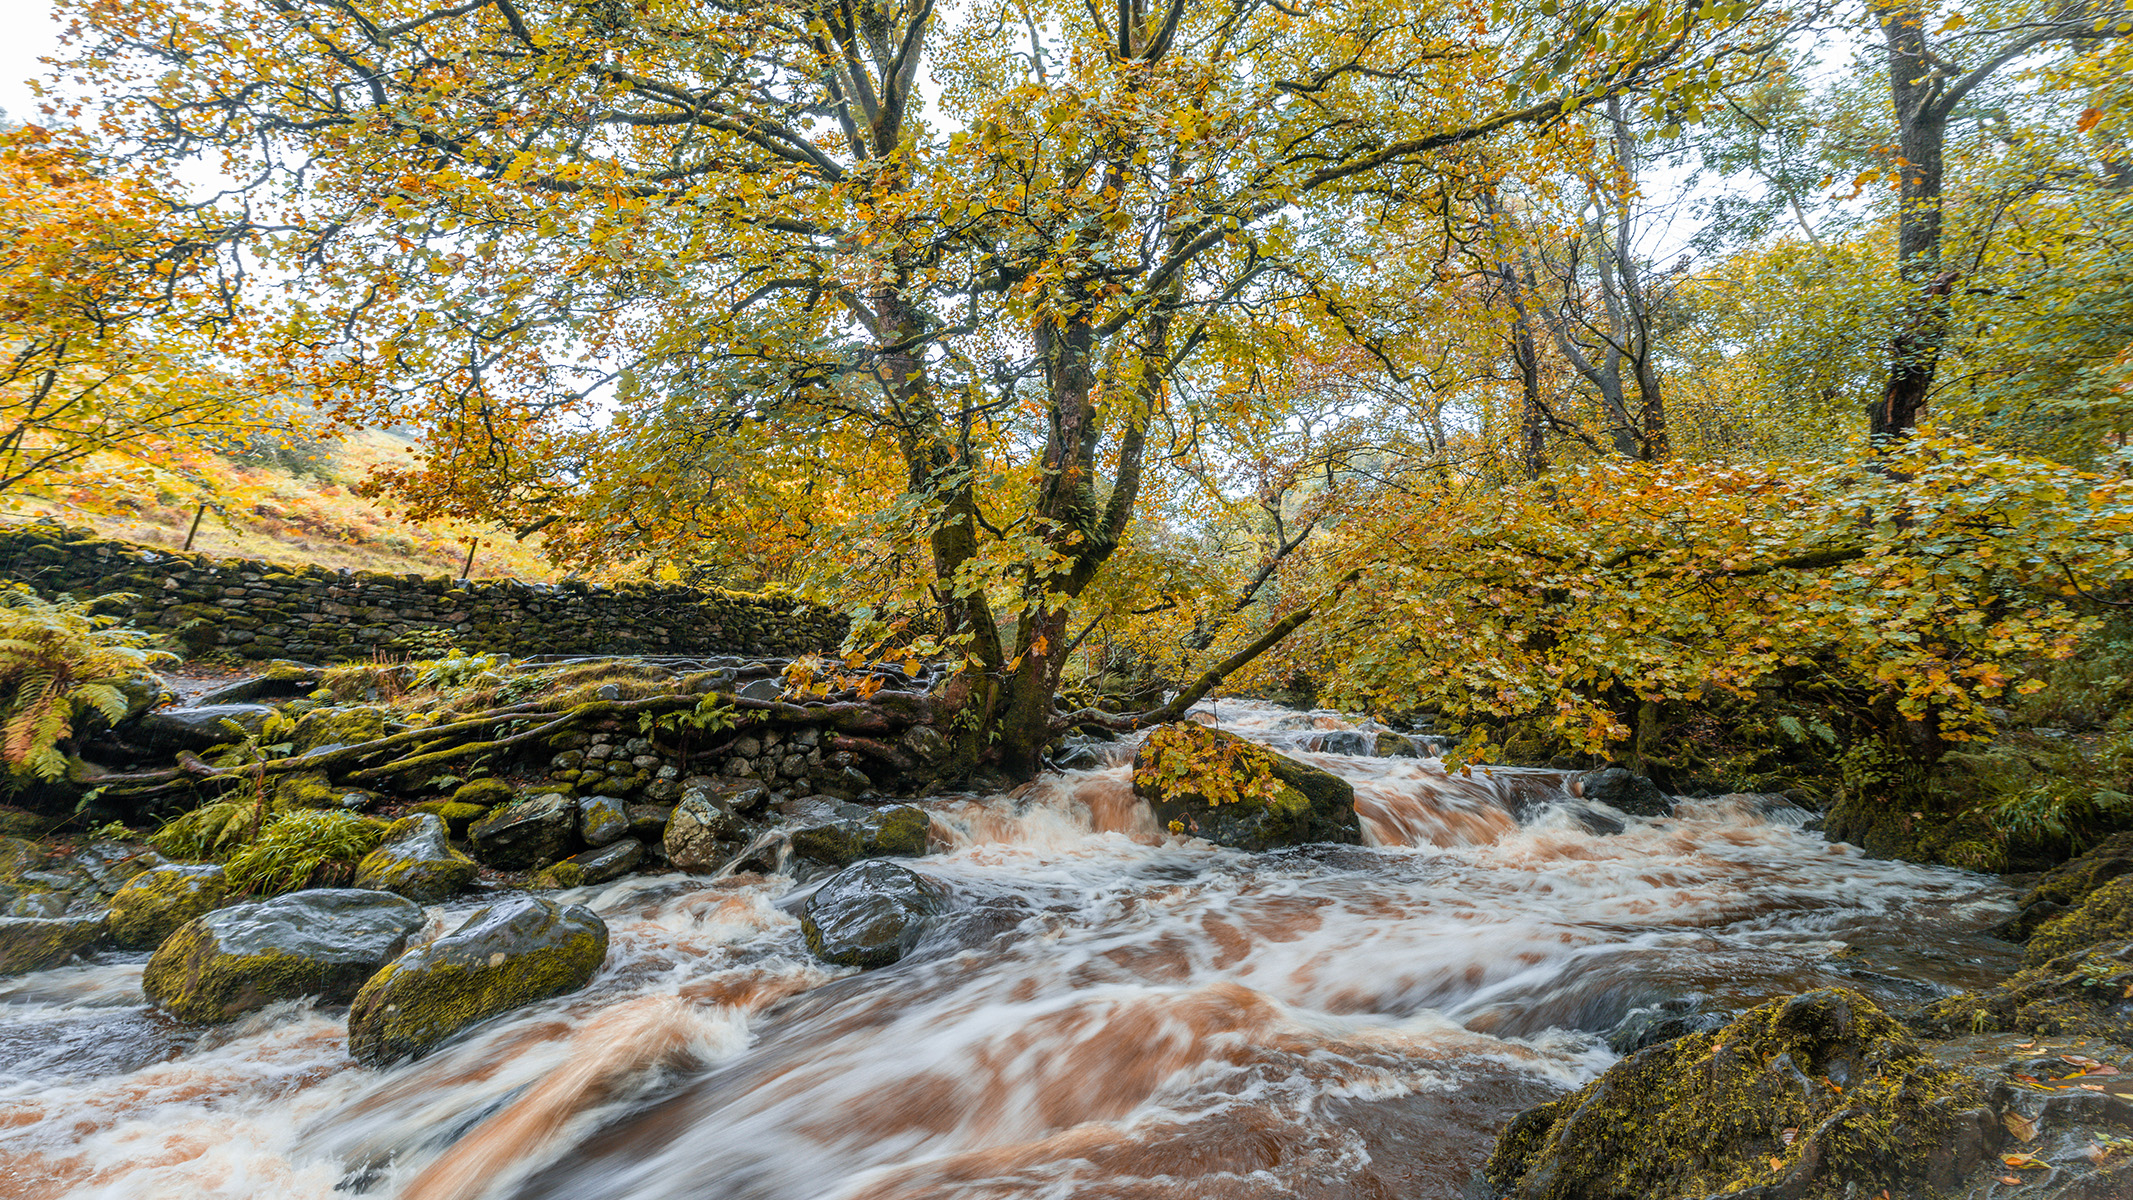 A sample image showing a stream running through trees with golden leaves — taken with the Sony A1